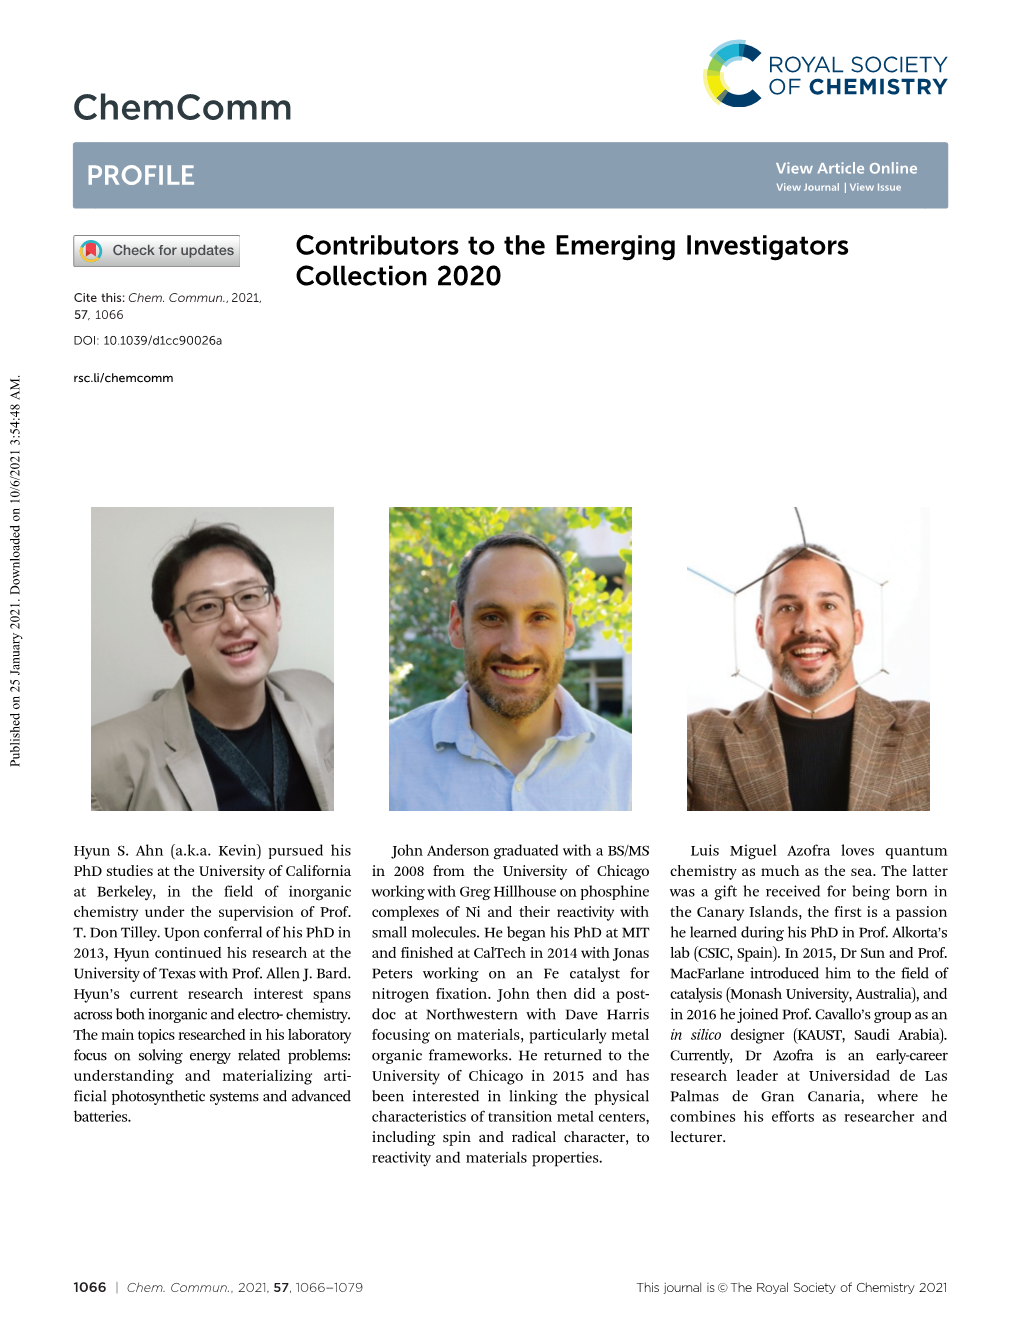 Contributors to the Emerging Investigators Collection 2020 Cite This: Chem